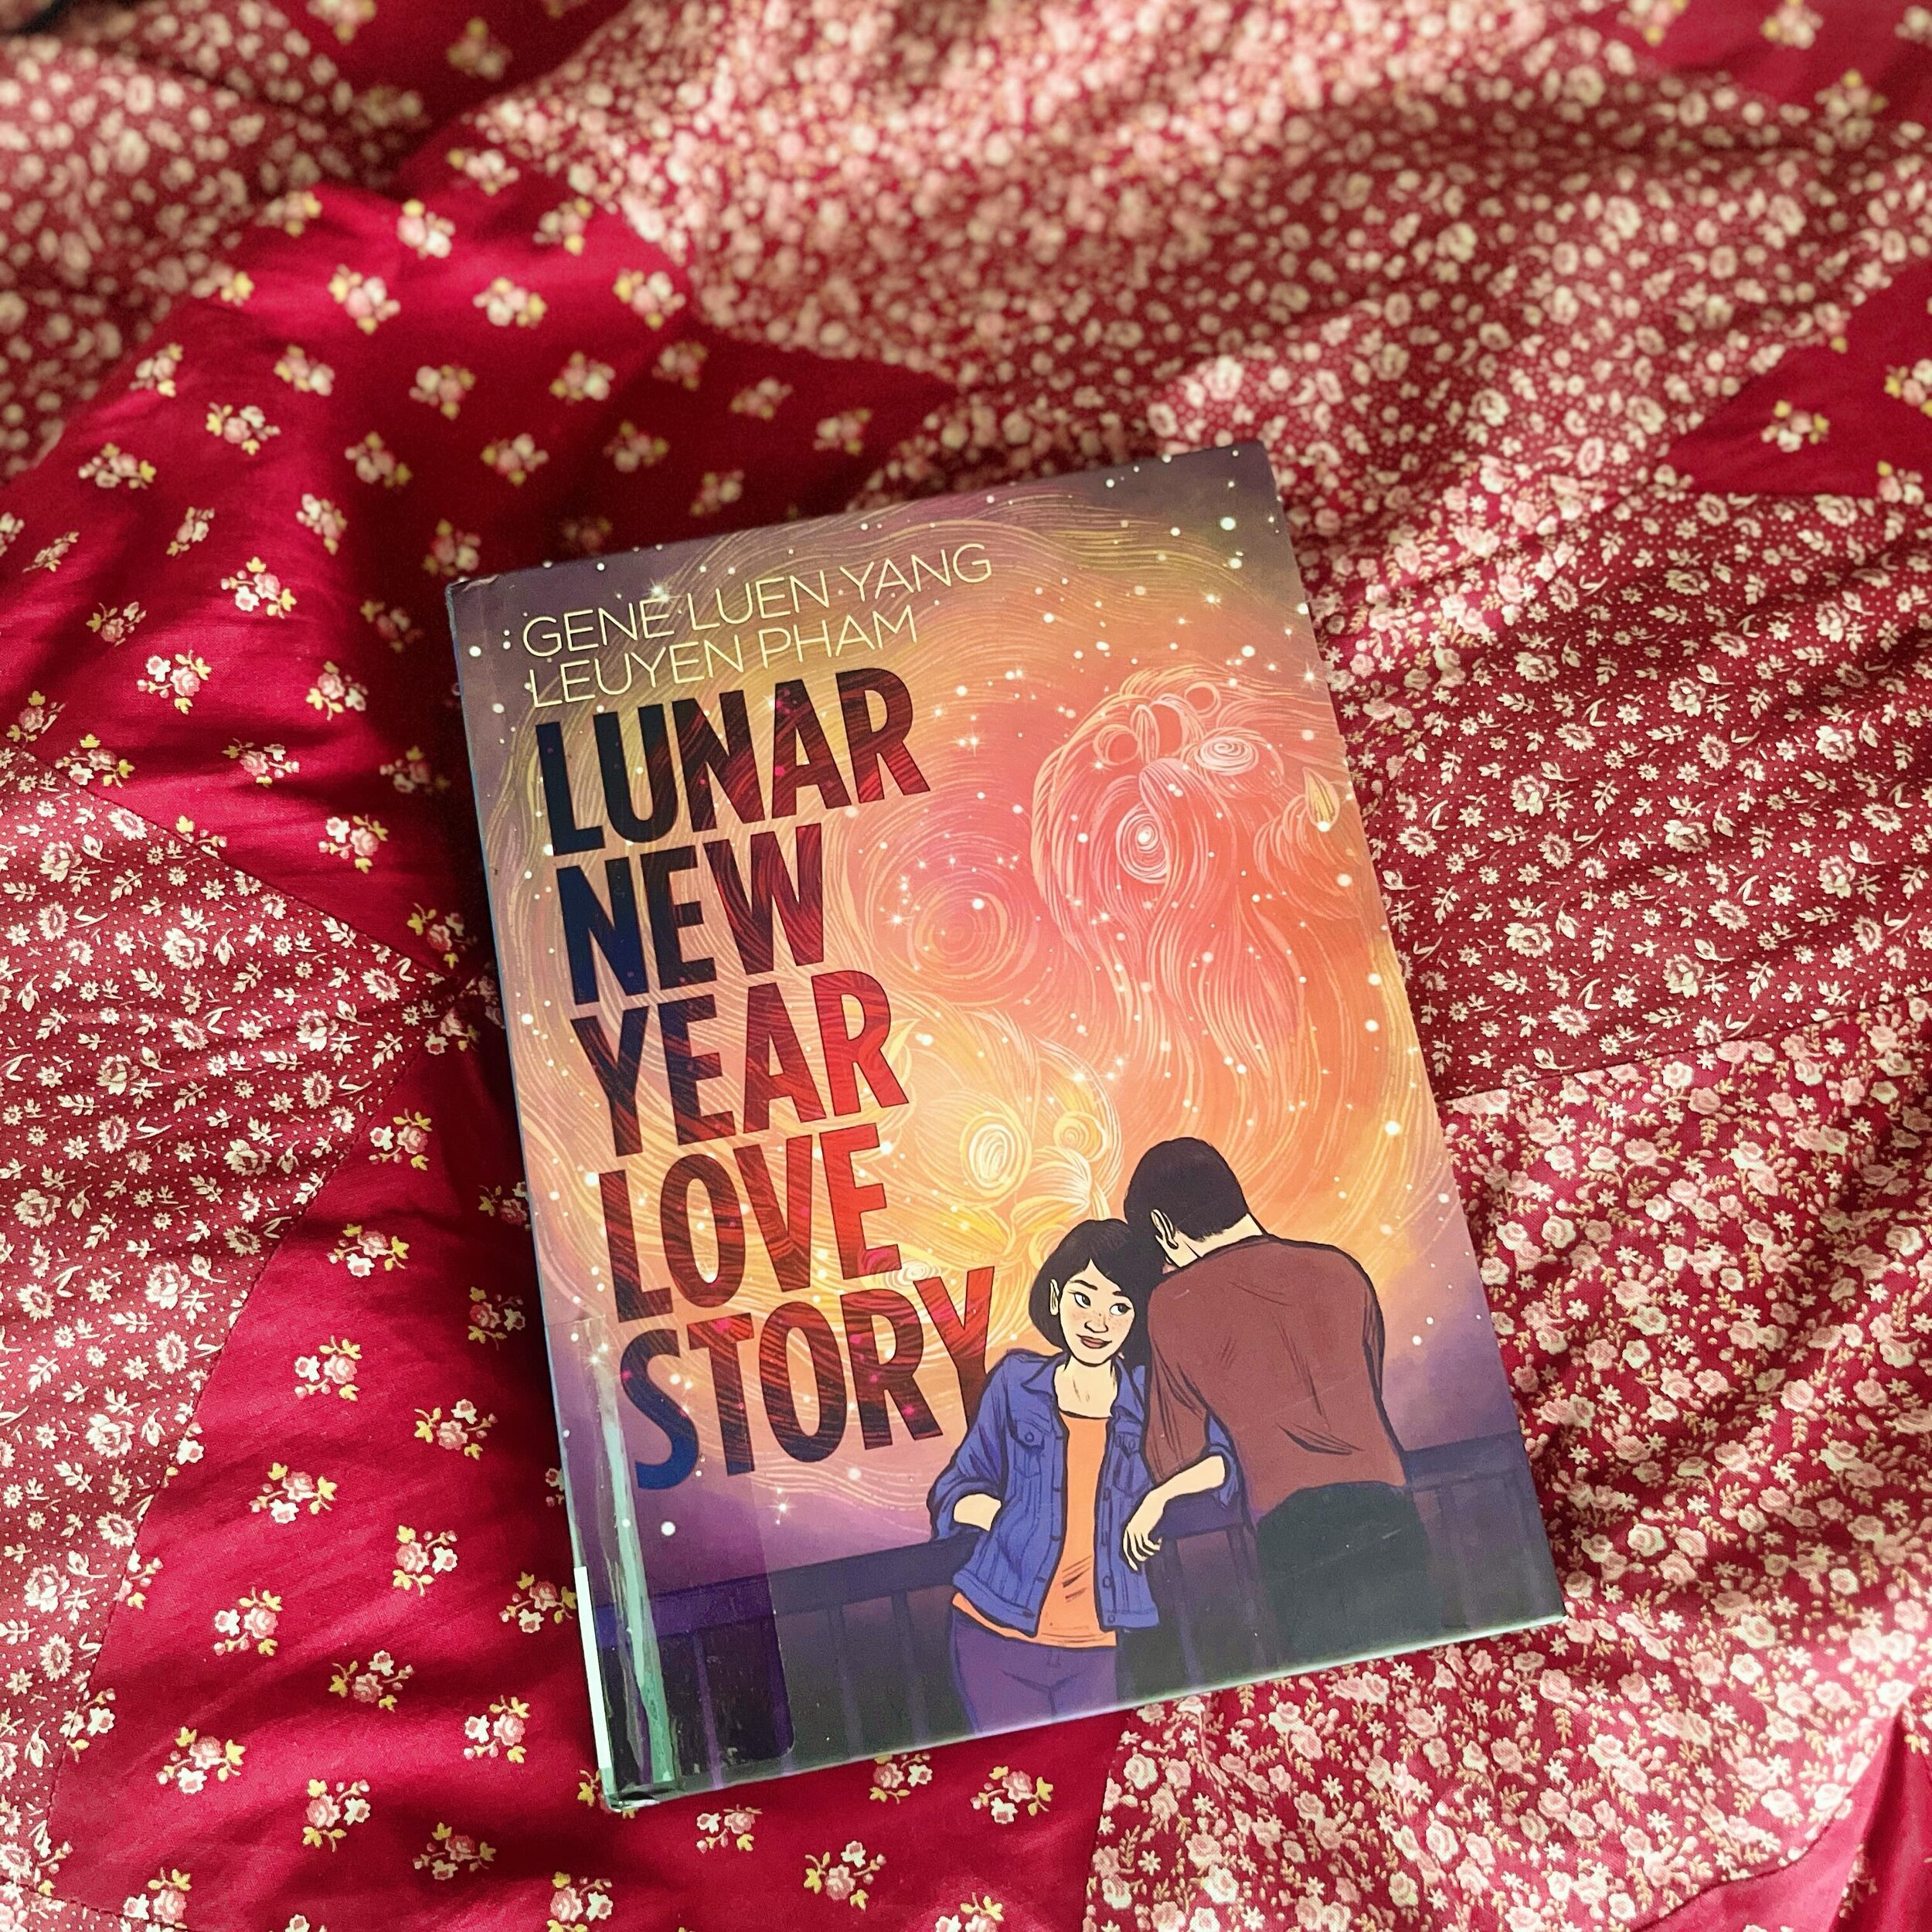 Have you read many graphic novels yet? I loved this YA love story and found the artwork to be stunning. Some books are just too beautiful not to photograph.
✨
This was one of the books I reviewed in my last newsletter. Tap the link in my bio list or 